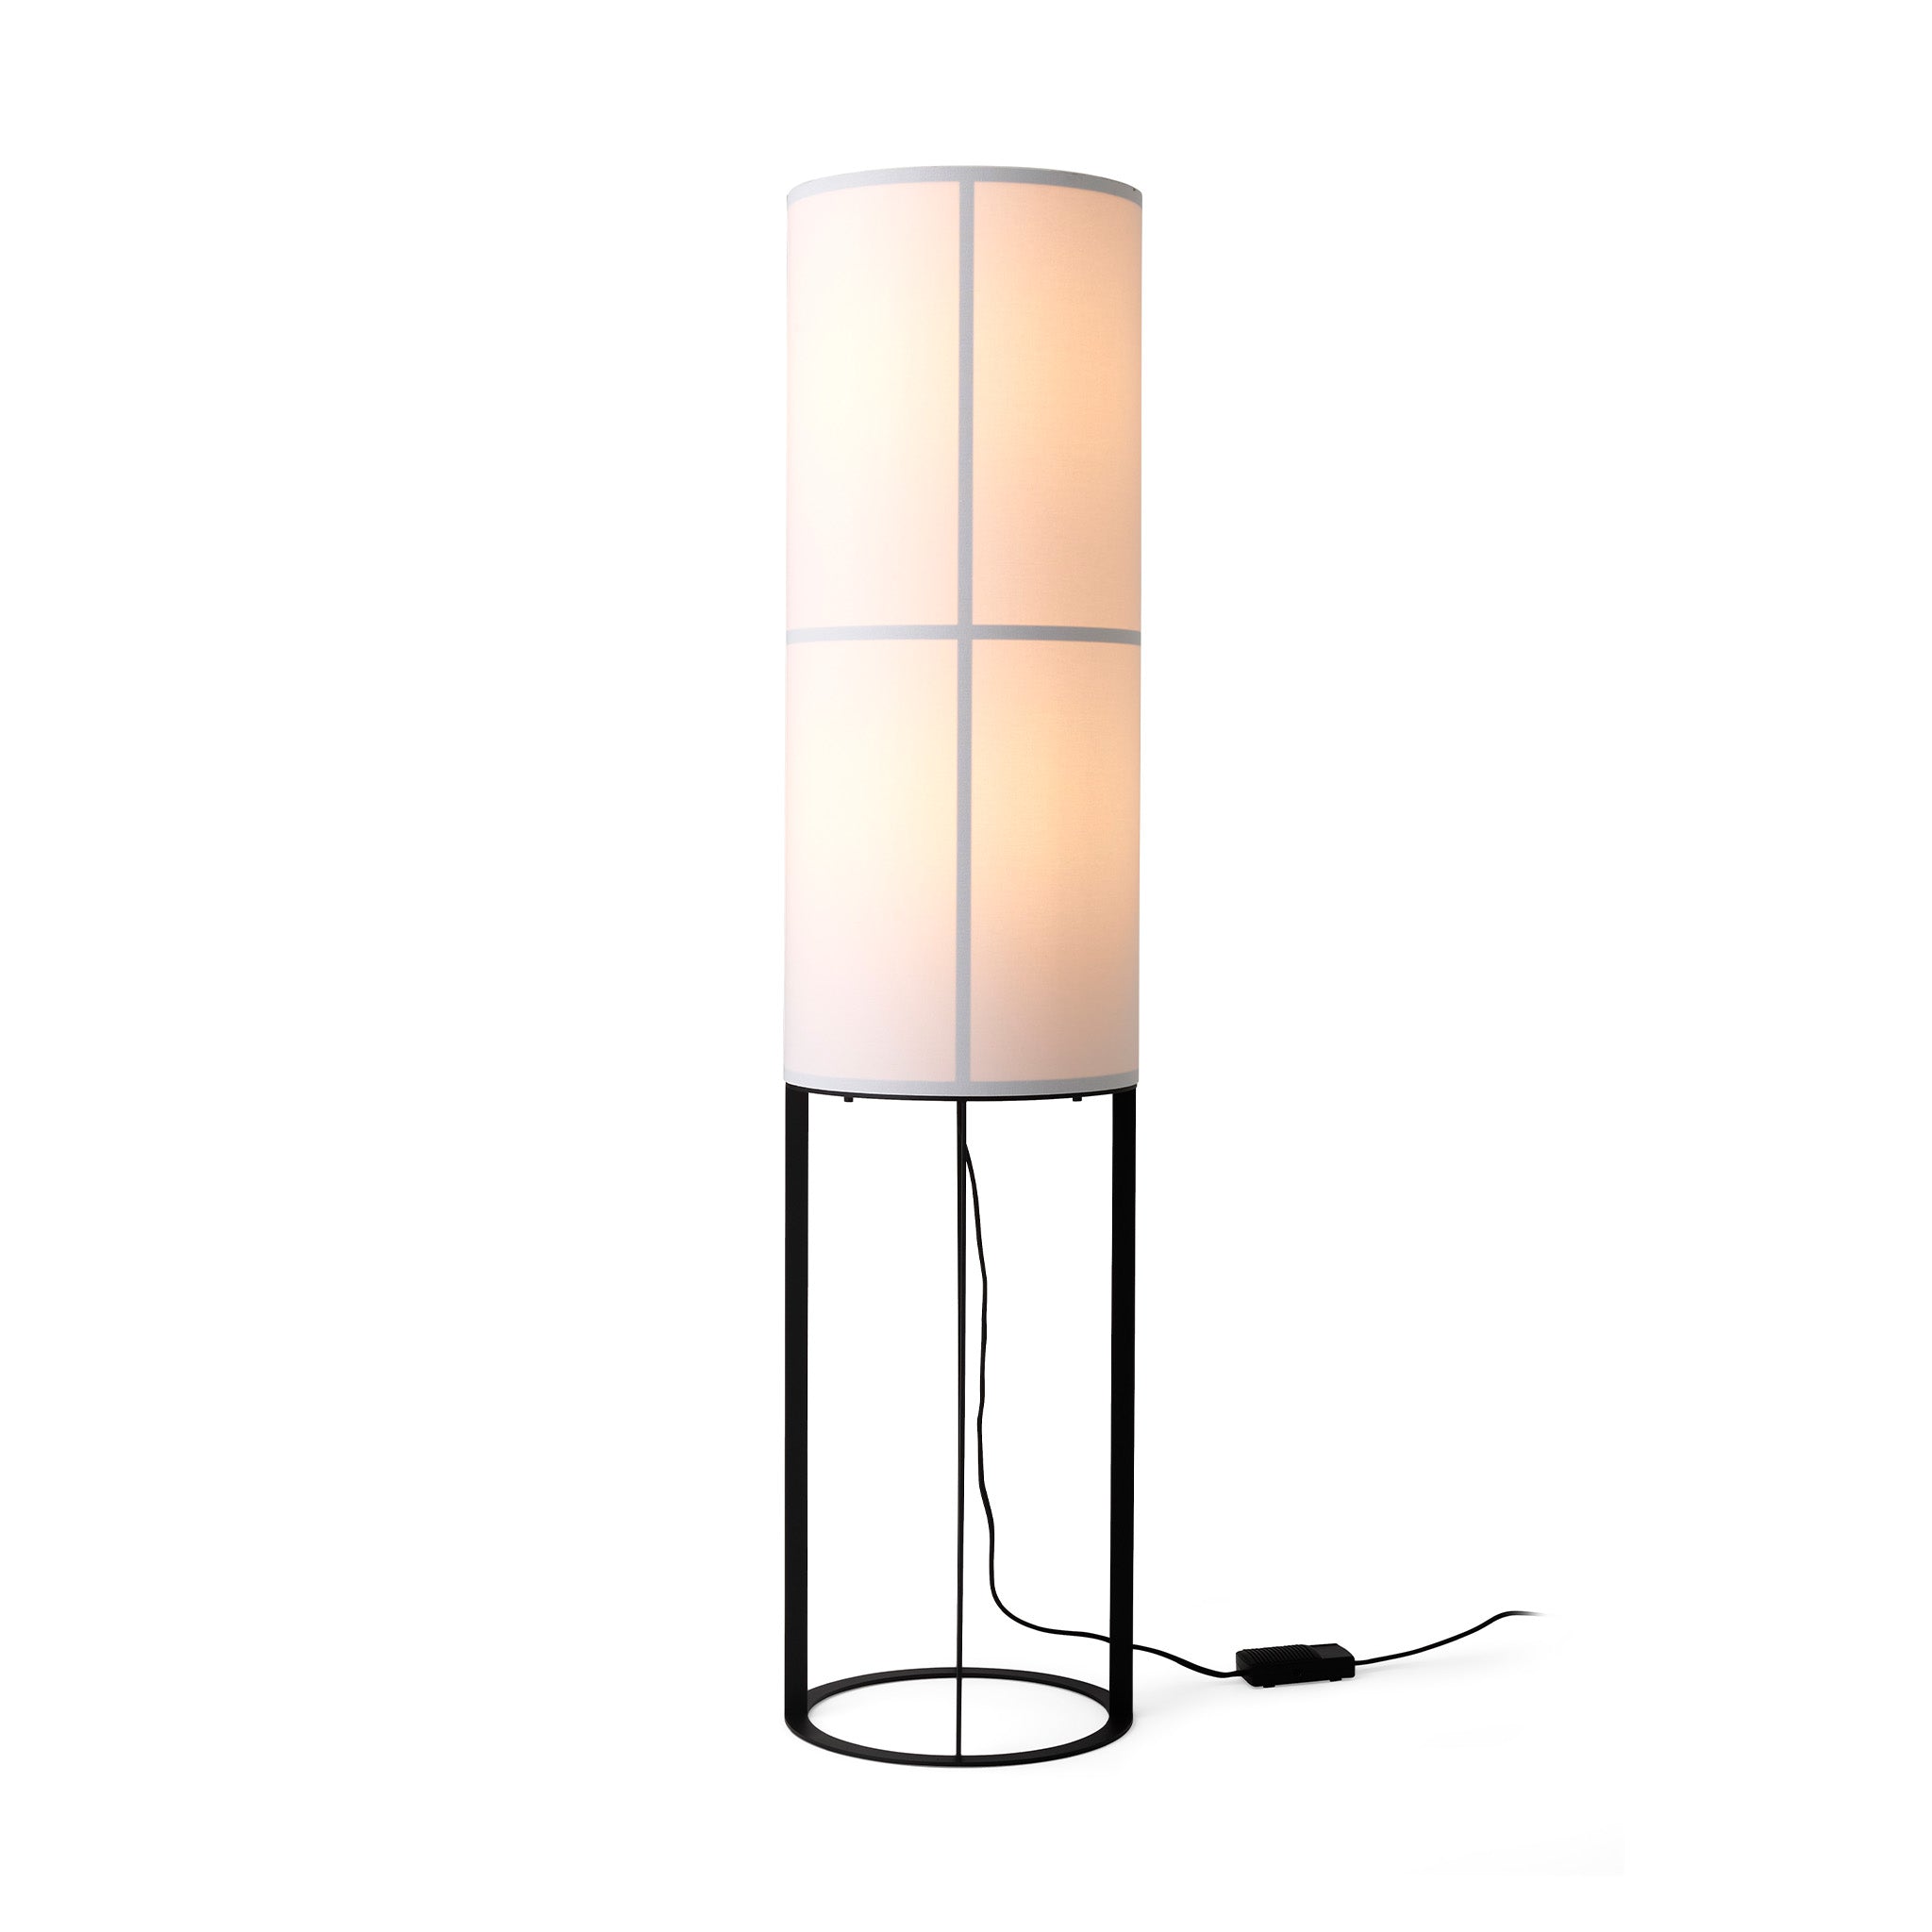 Hashira High Floor Lamp by Norm Architects